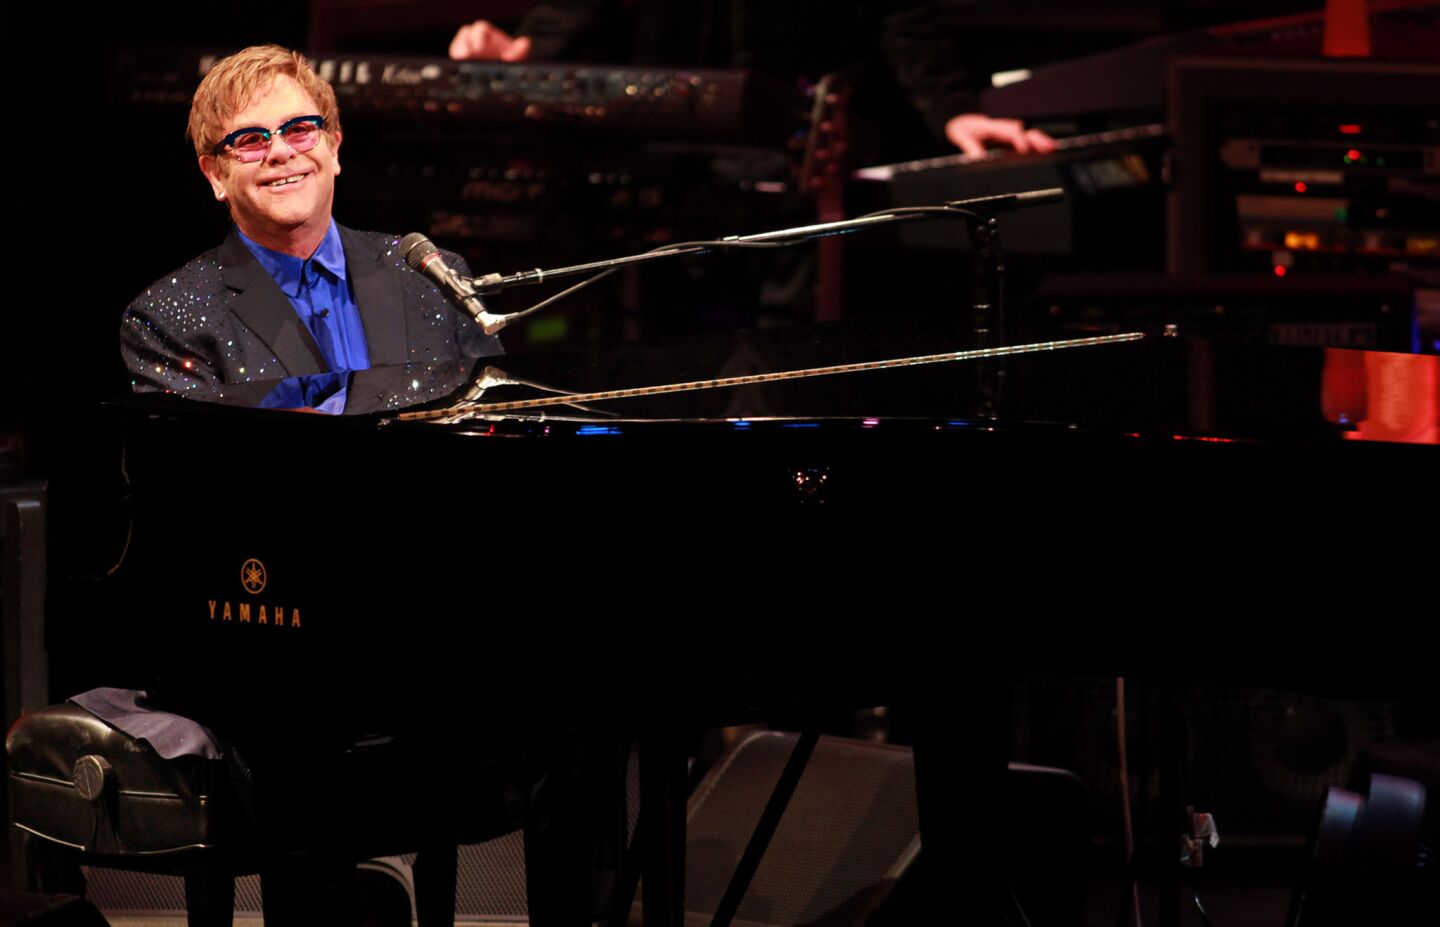 Musician Elton John first came out as bisexual during a Rolling Stone "Elton John: It's Lonely at the Top" interview in 1976. It wasn't until after his second divorce in 1988 that he told Rolling Stone he was comfortable being a gay man.